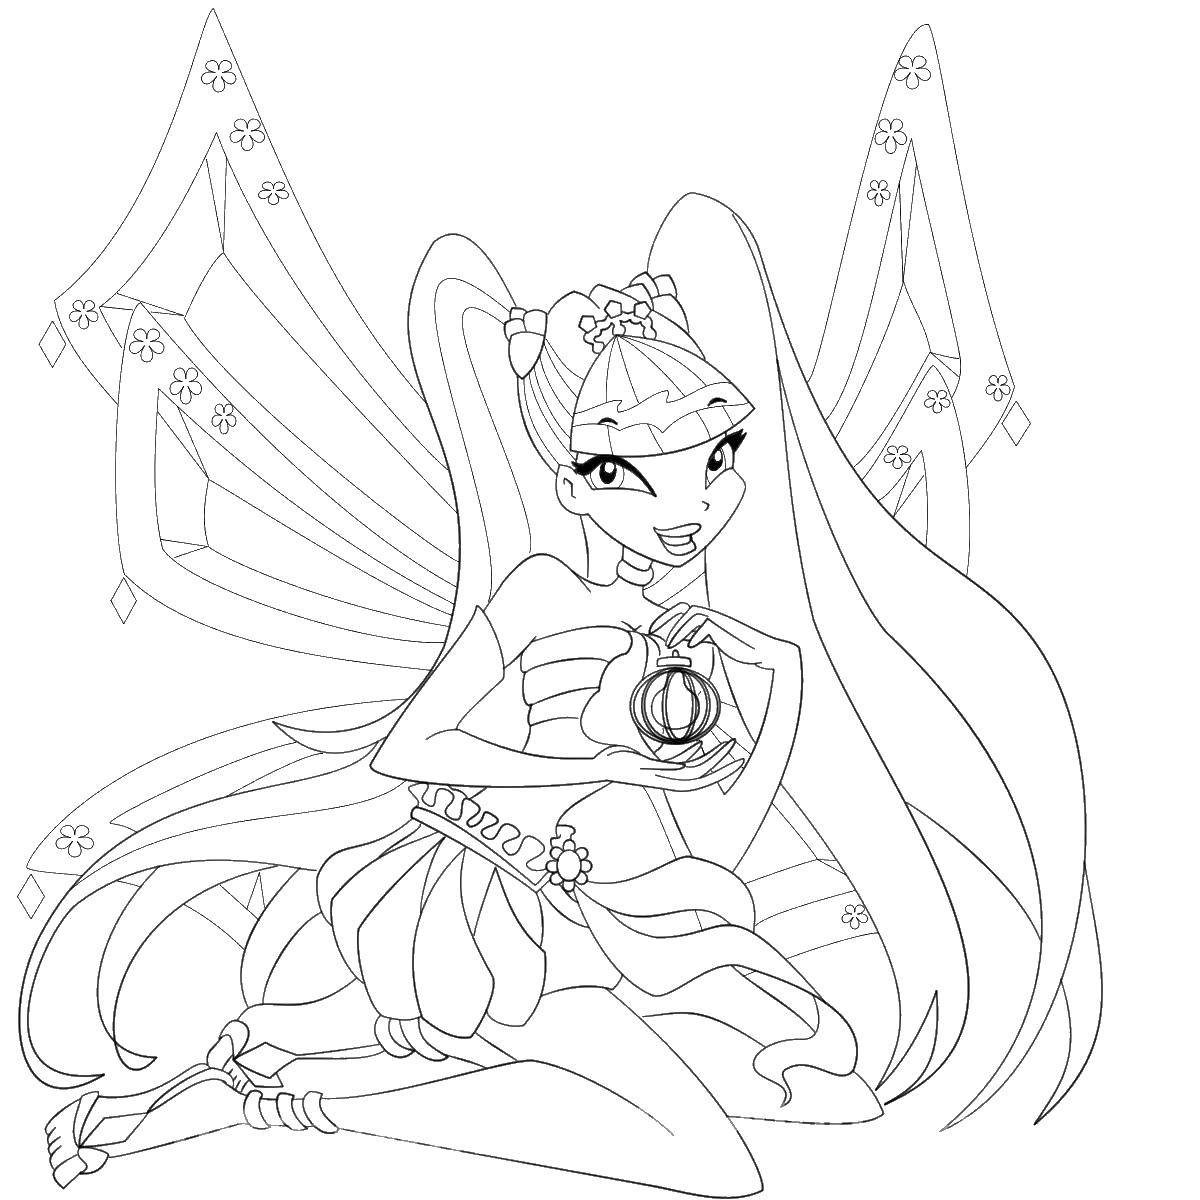 Coloring Fairy Muse. Category Winx club. Tags:  winx club, winx, Pixies, Muse.